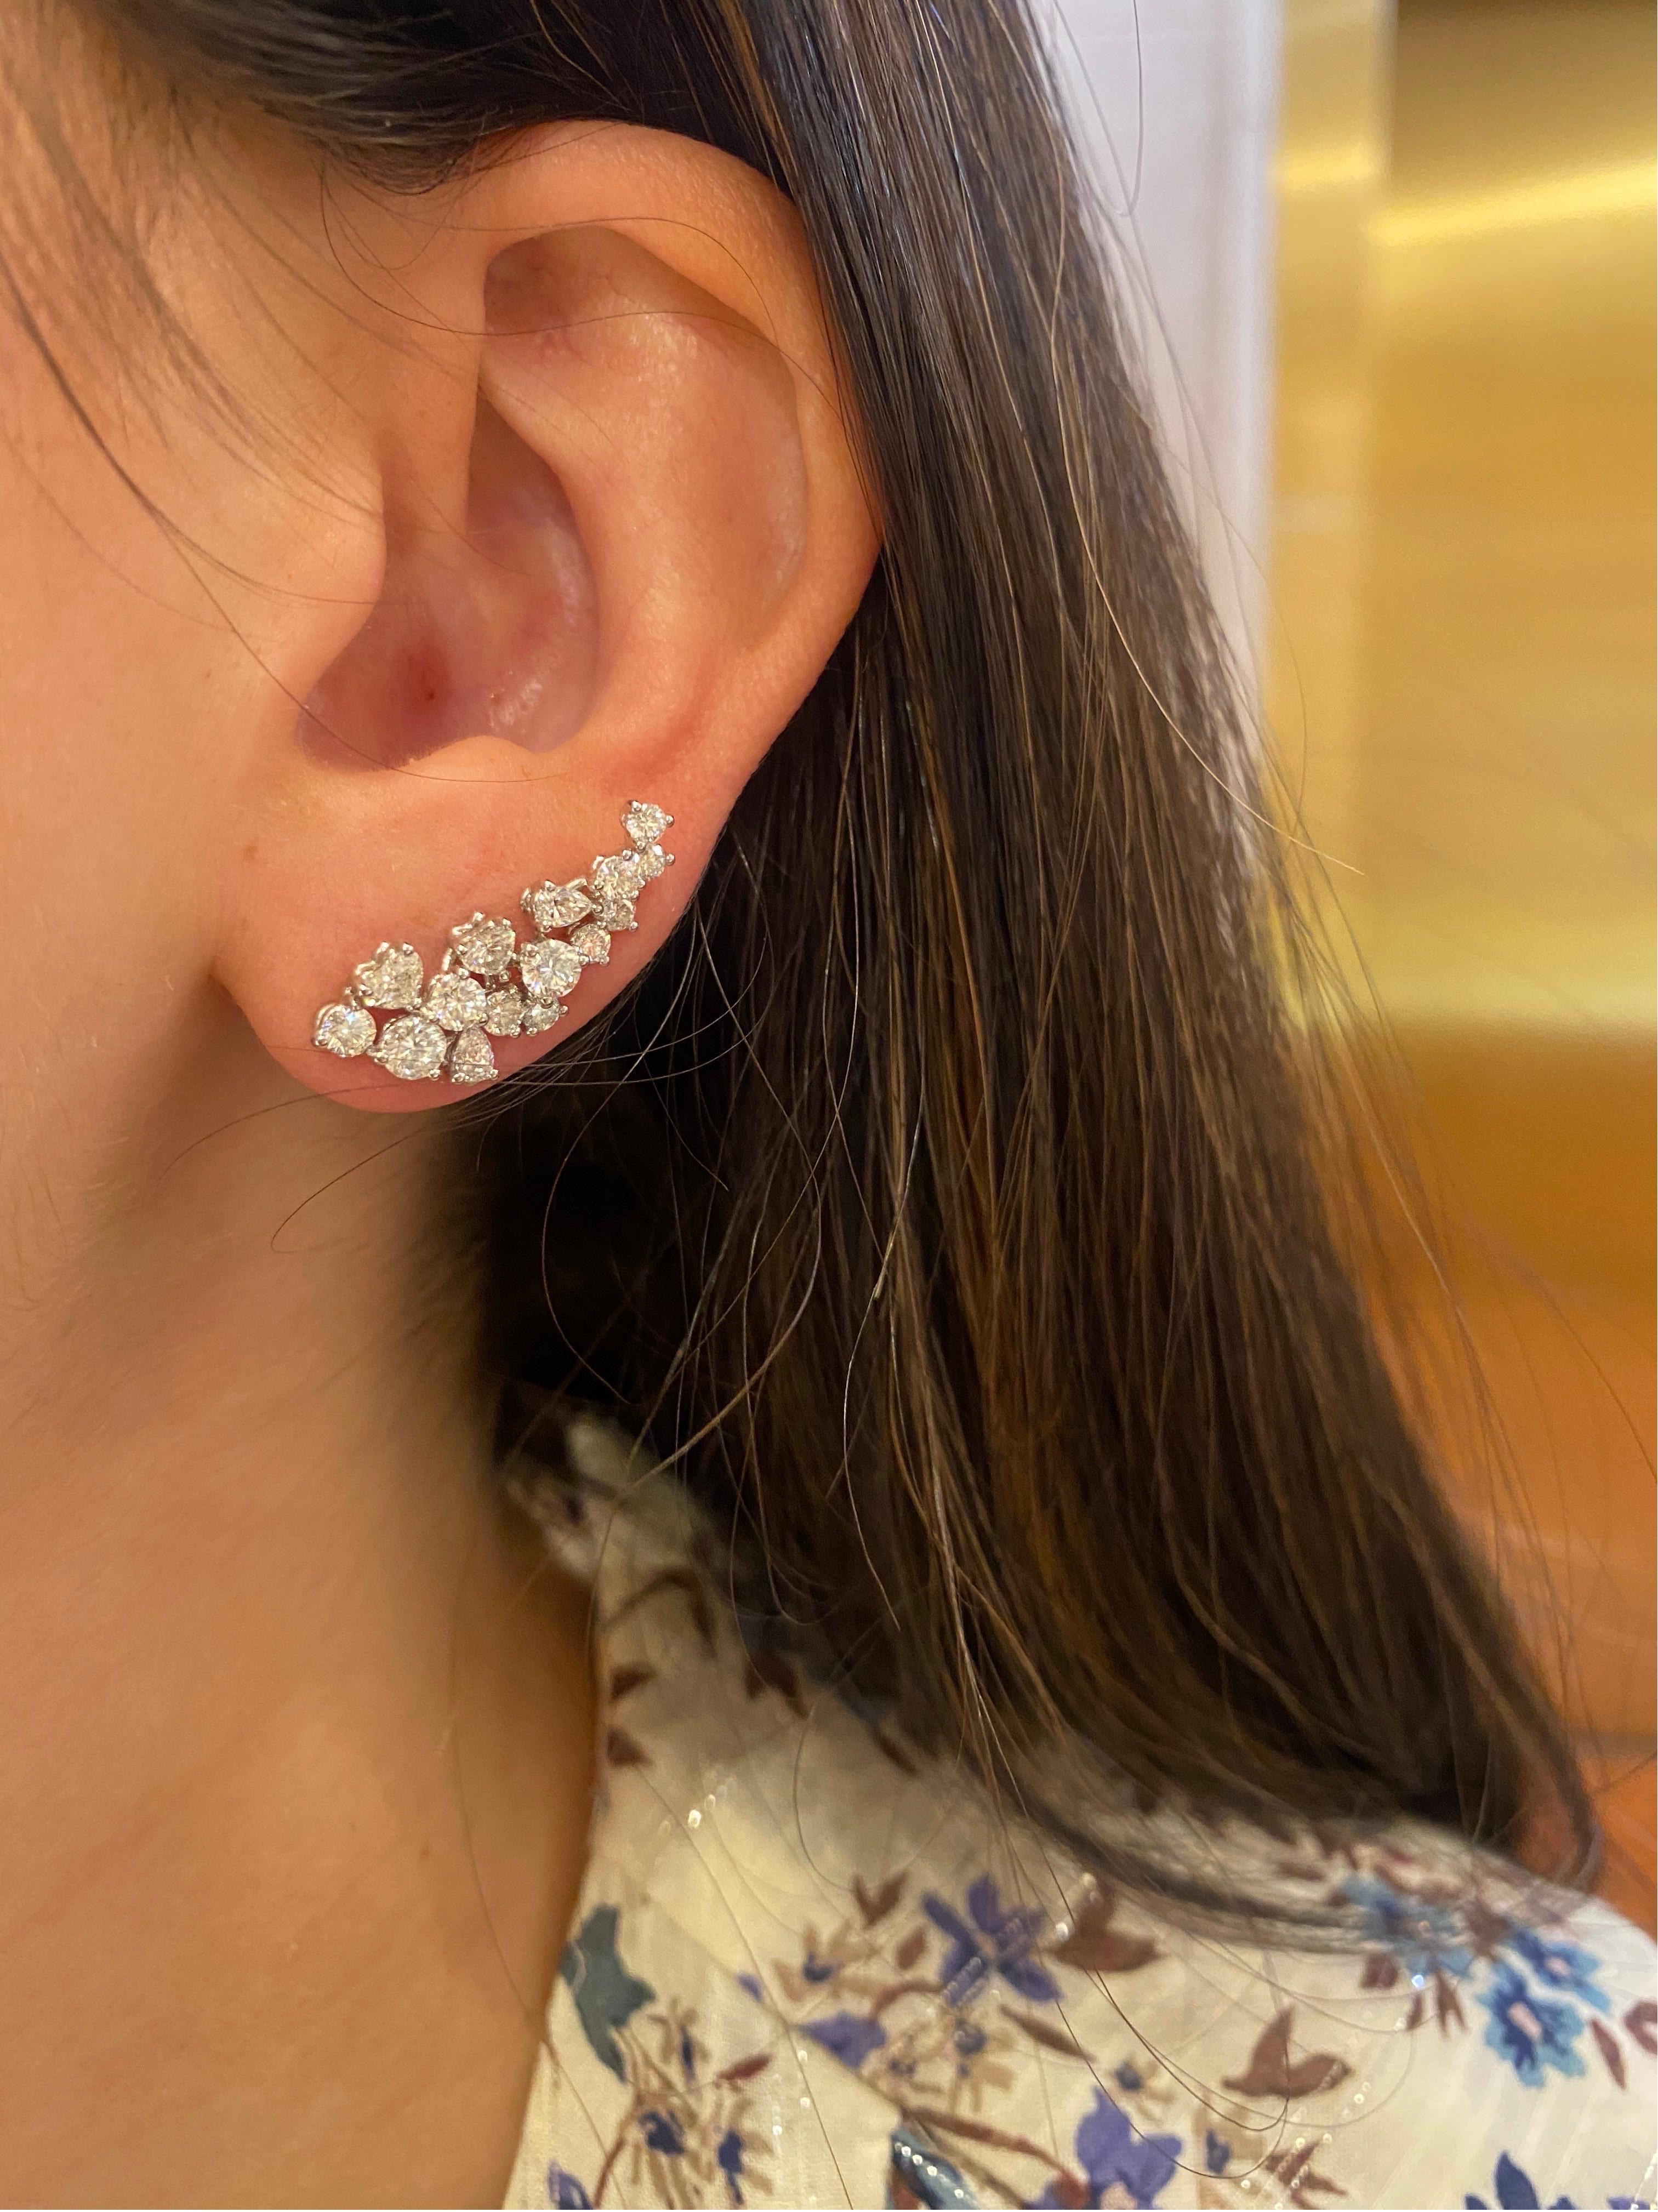 Earrings of rich elegance and timeless spirit. These dazzling climber diamond earrings are handcrafted with the utmost love and attention to detail. Inlaid with intricate diamonds and cut into brilliant heart, pear and round shapes.

Composition: 30